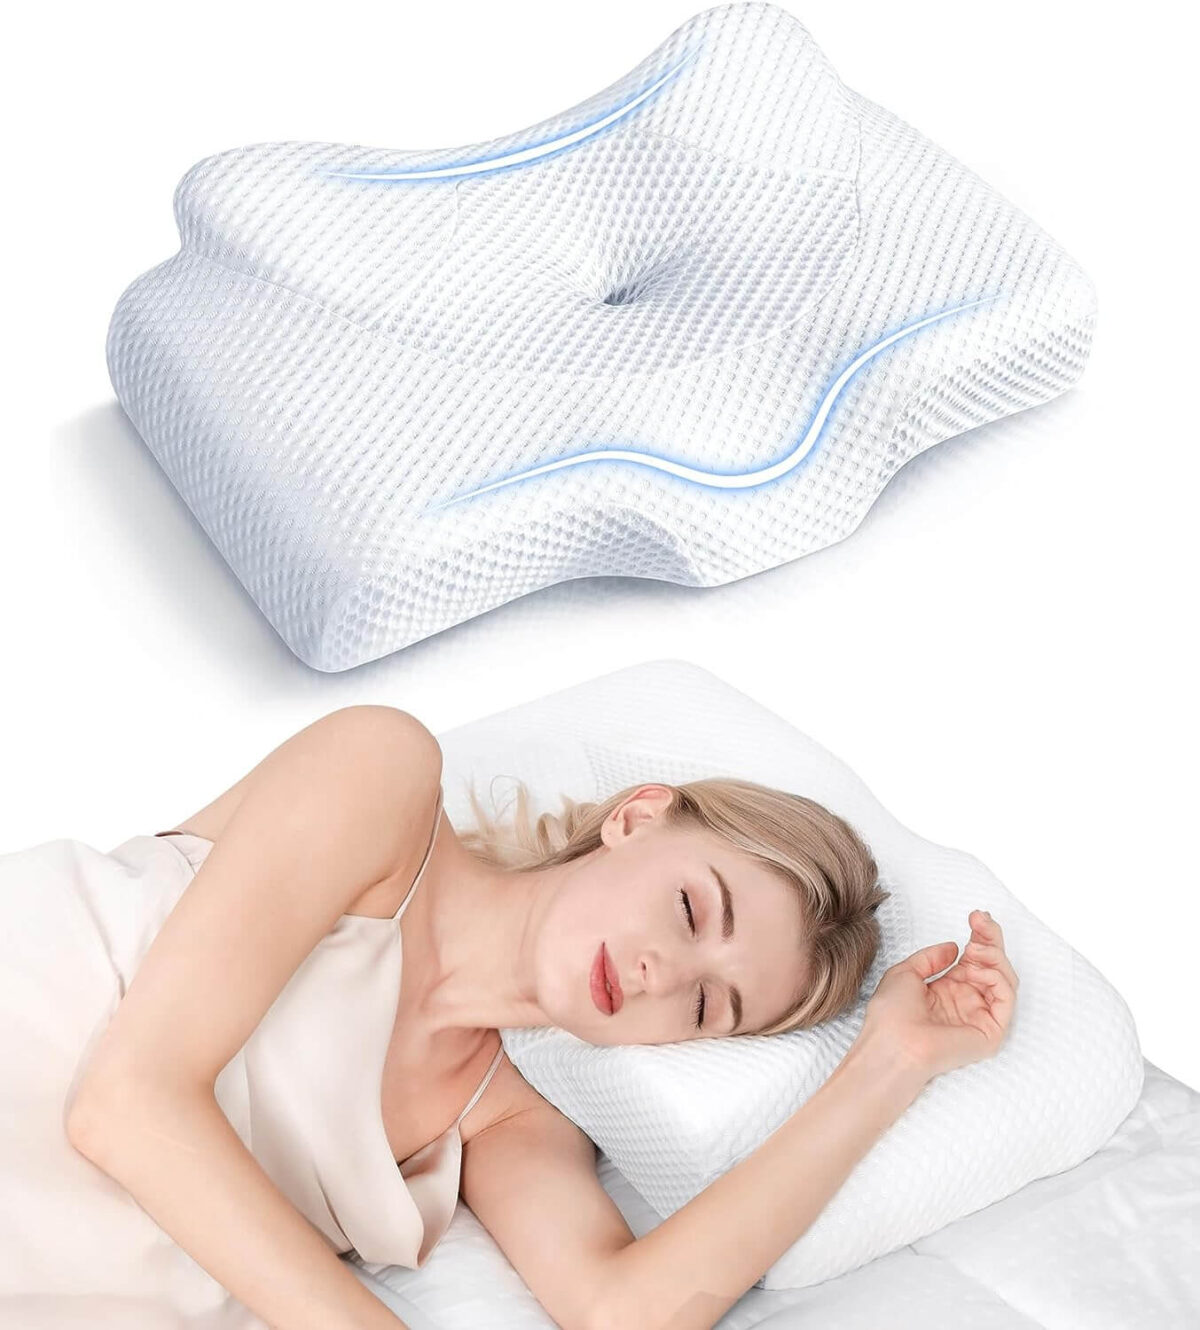 Featured Image for Osteo Cervical Pillow for Neck Pain Relief, Hollow Design Odorless Memory Foam Pillows with Cooling Case, Adjustable Orthopedic Bed Pillow for Sleeping, Contour Support for Side Back Sleepers